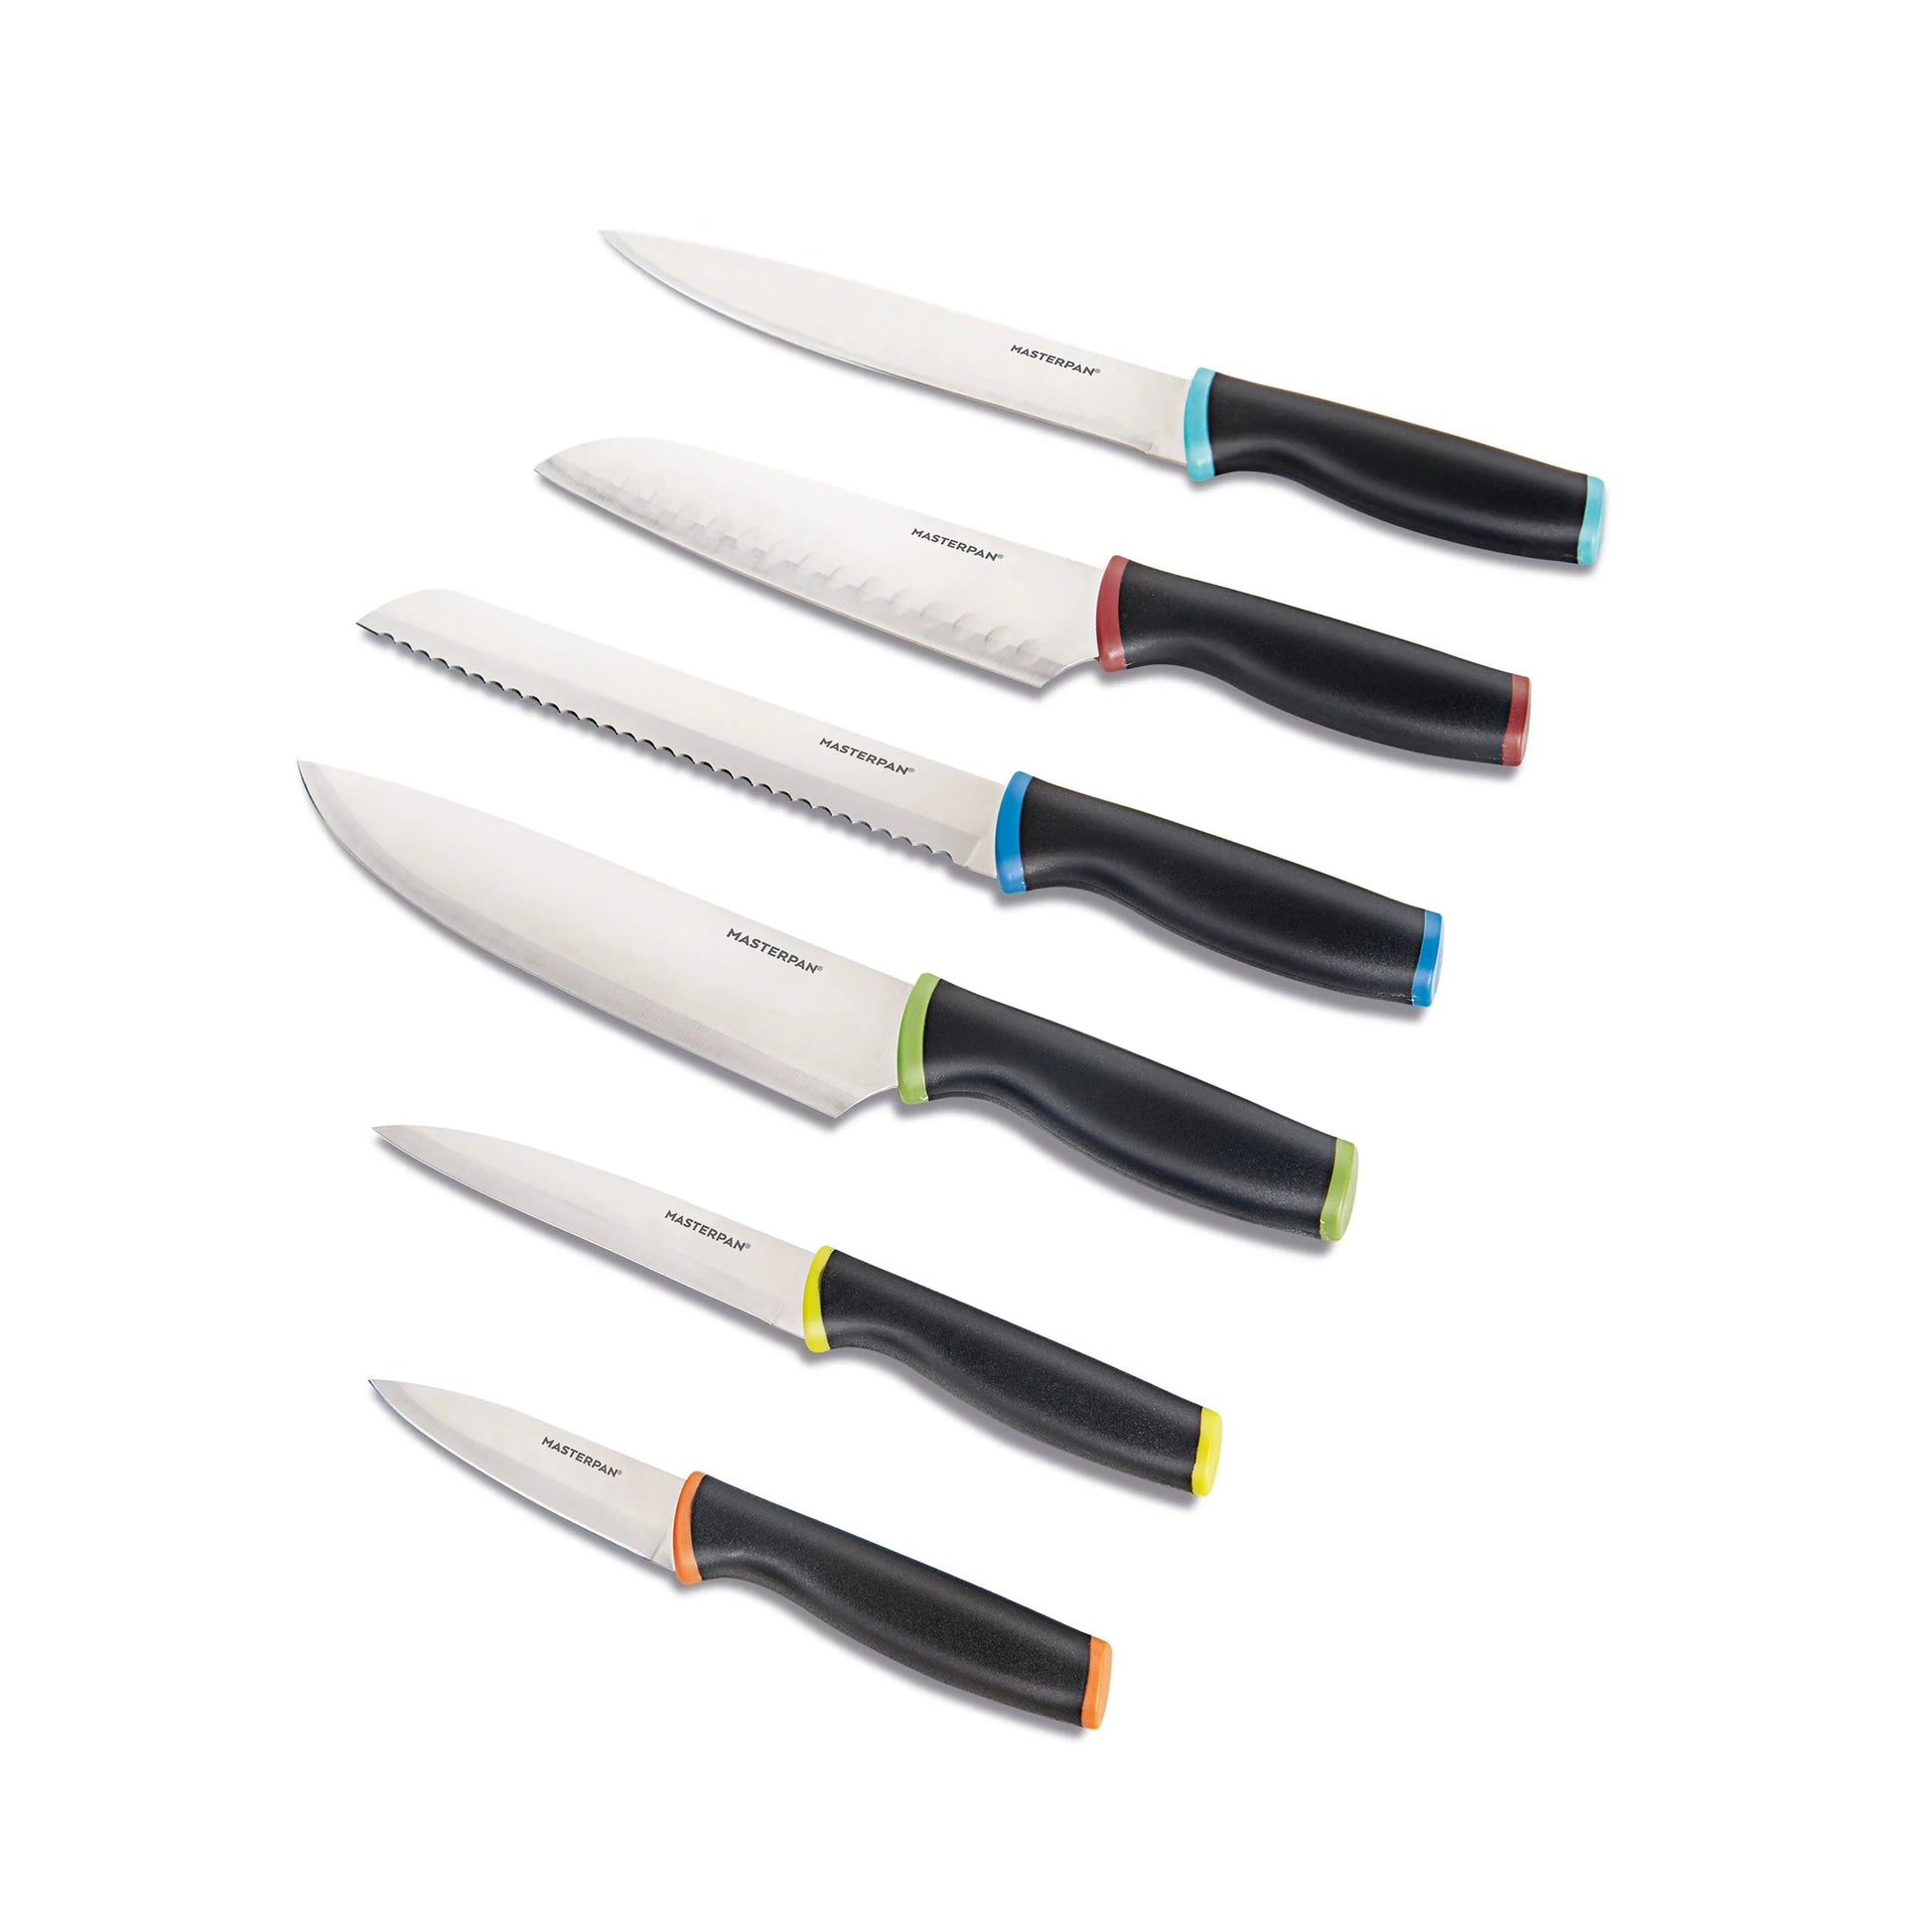 https://kitchenoasis.com/cdn/shop/files/MASTERPAN-Kitchen-Prep-12-pc-Knife-Set-With-Protective-Blade-Covers-Stainless-Steel-Blade-and-Non-Slip-Handle.webp?v=1685840193&width=1946